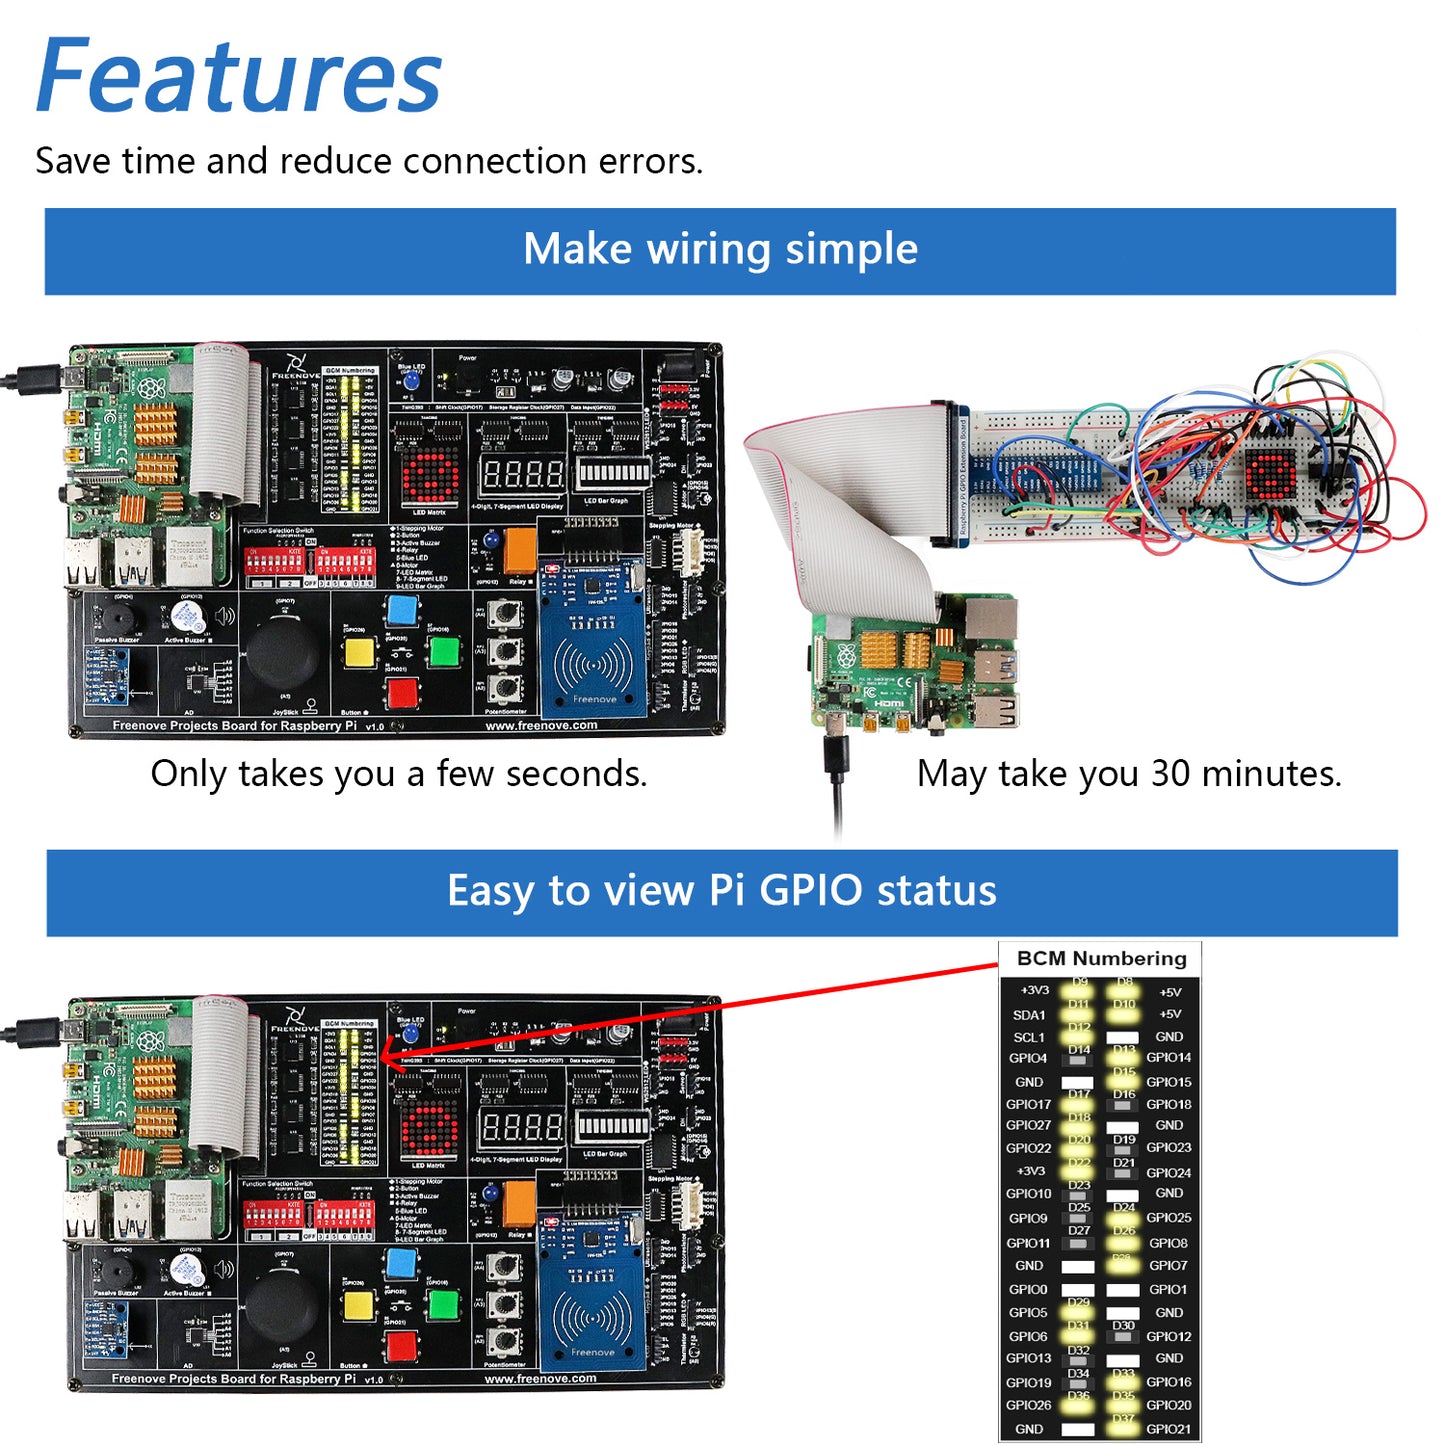 Freenove Projects Kit for Raspberry Pi